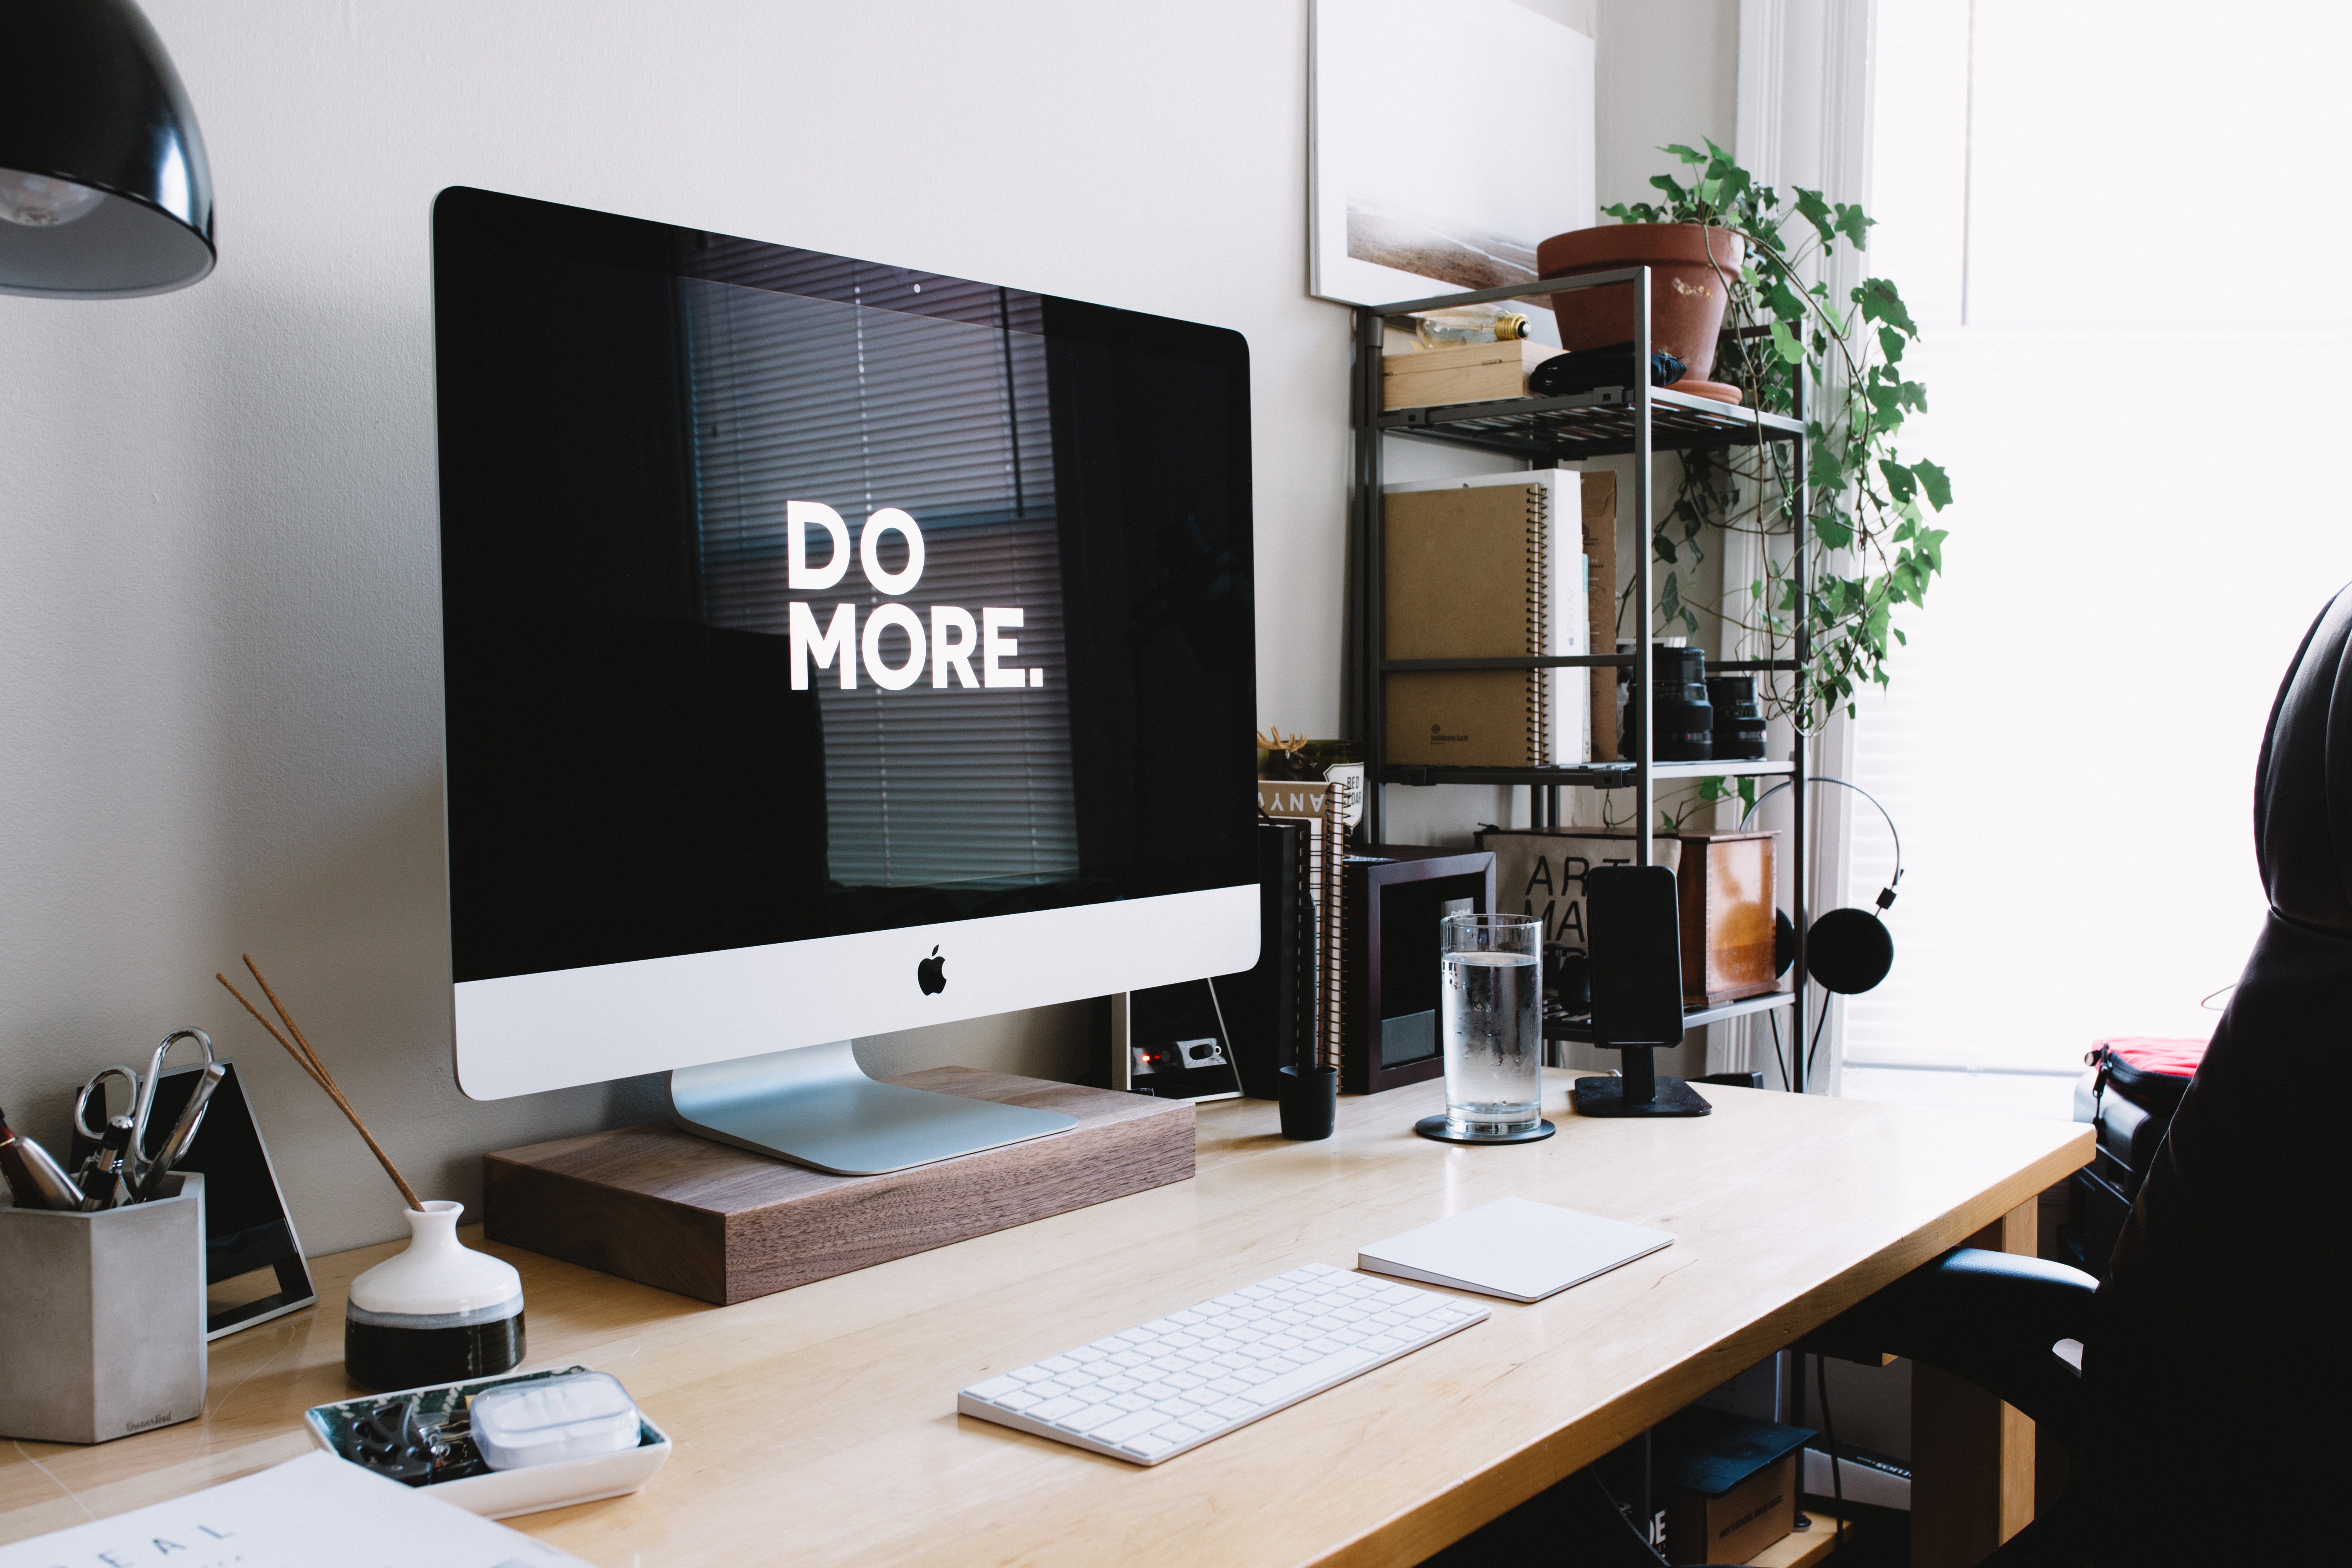 screensaver displaying 'Do More' on organized home office desk